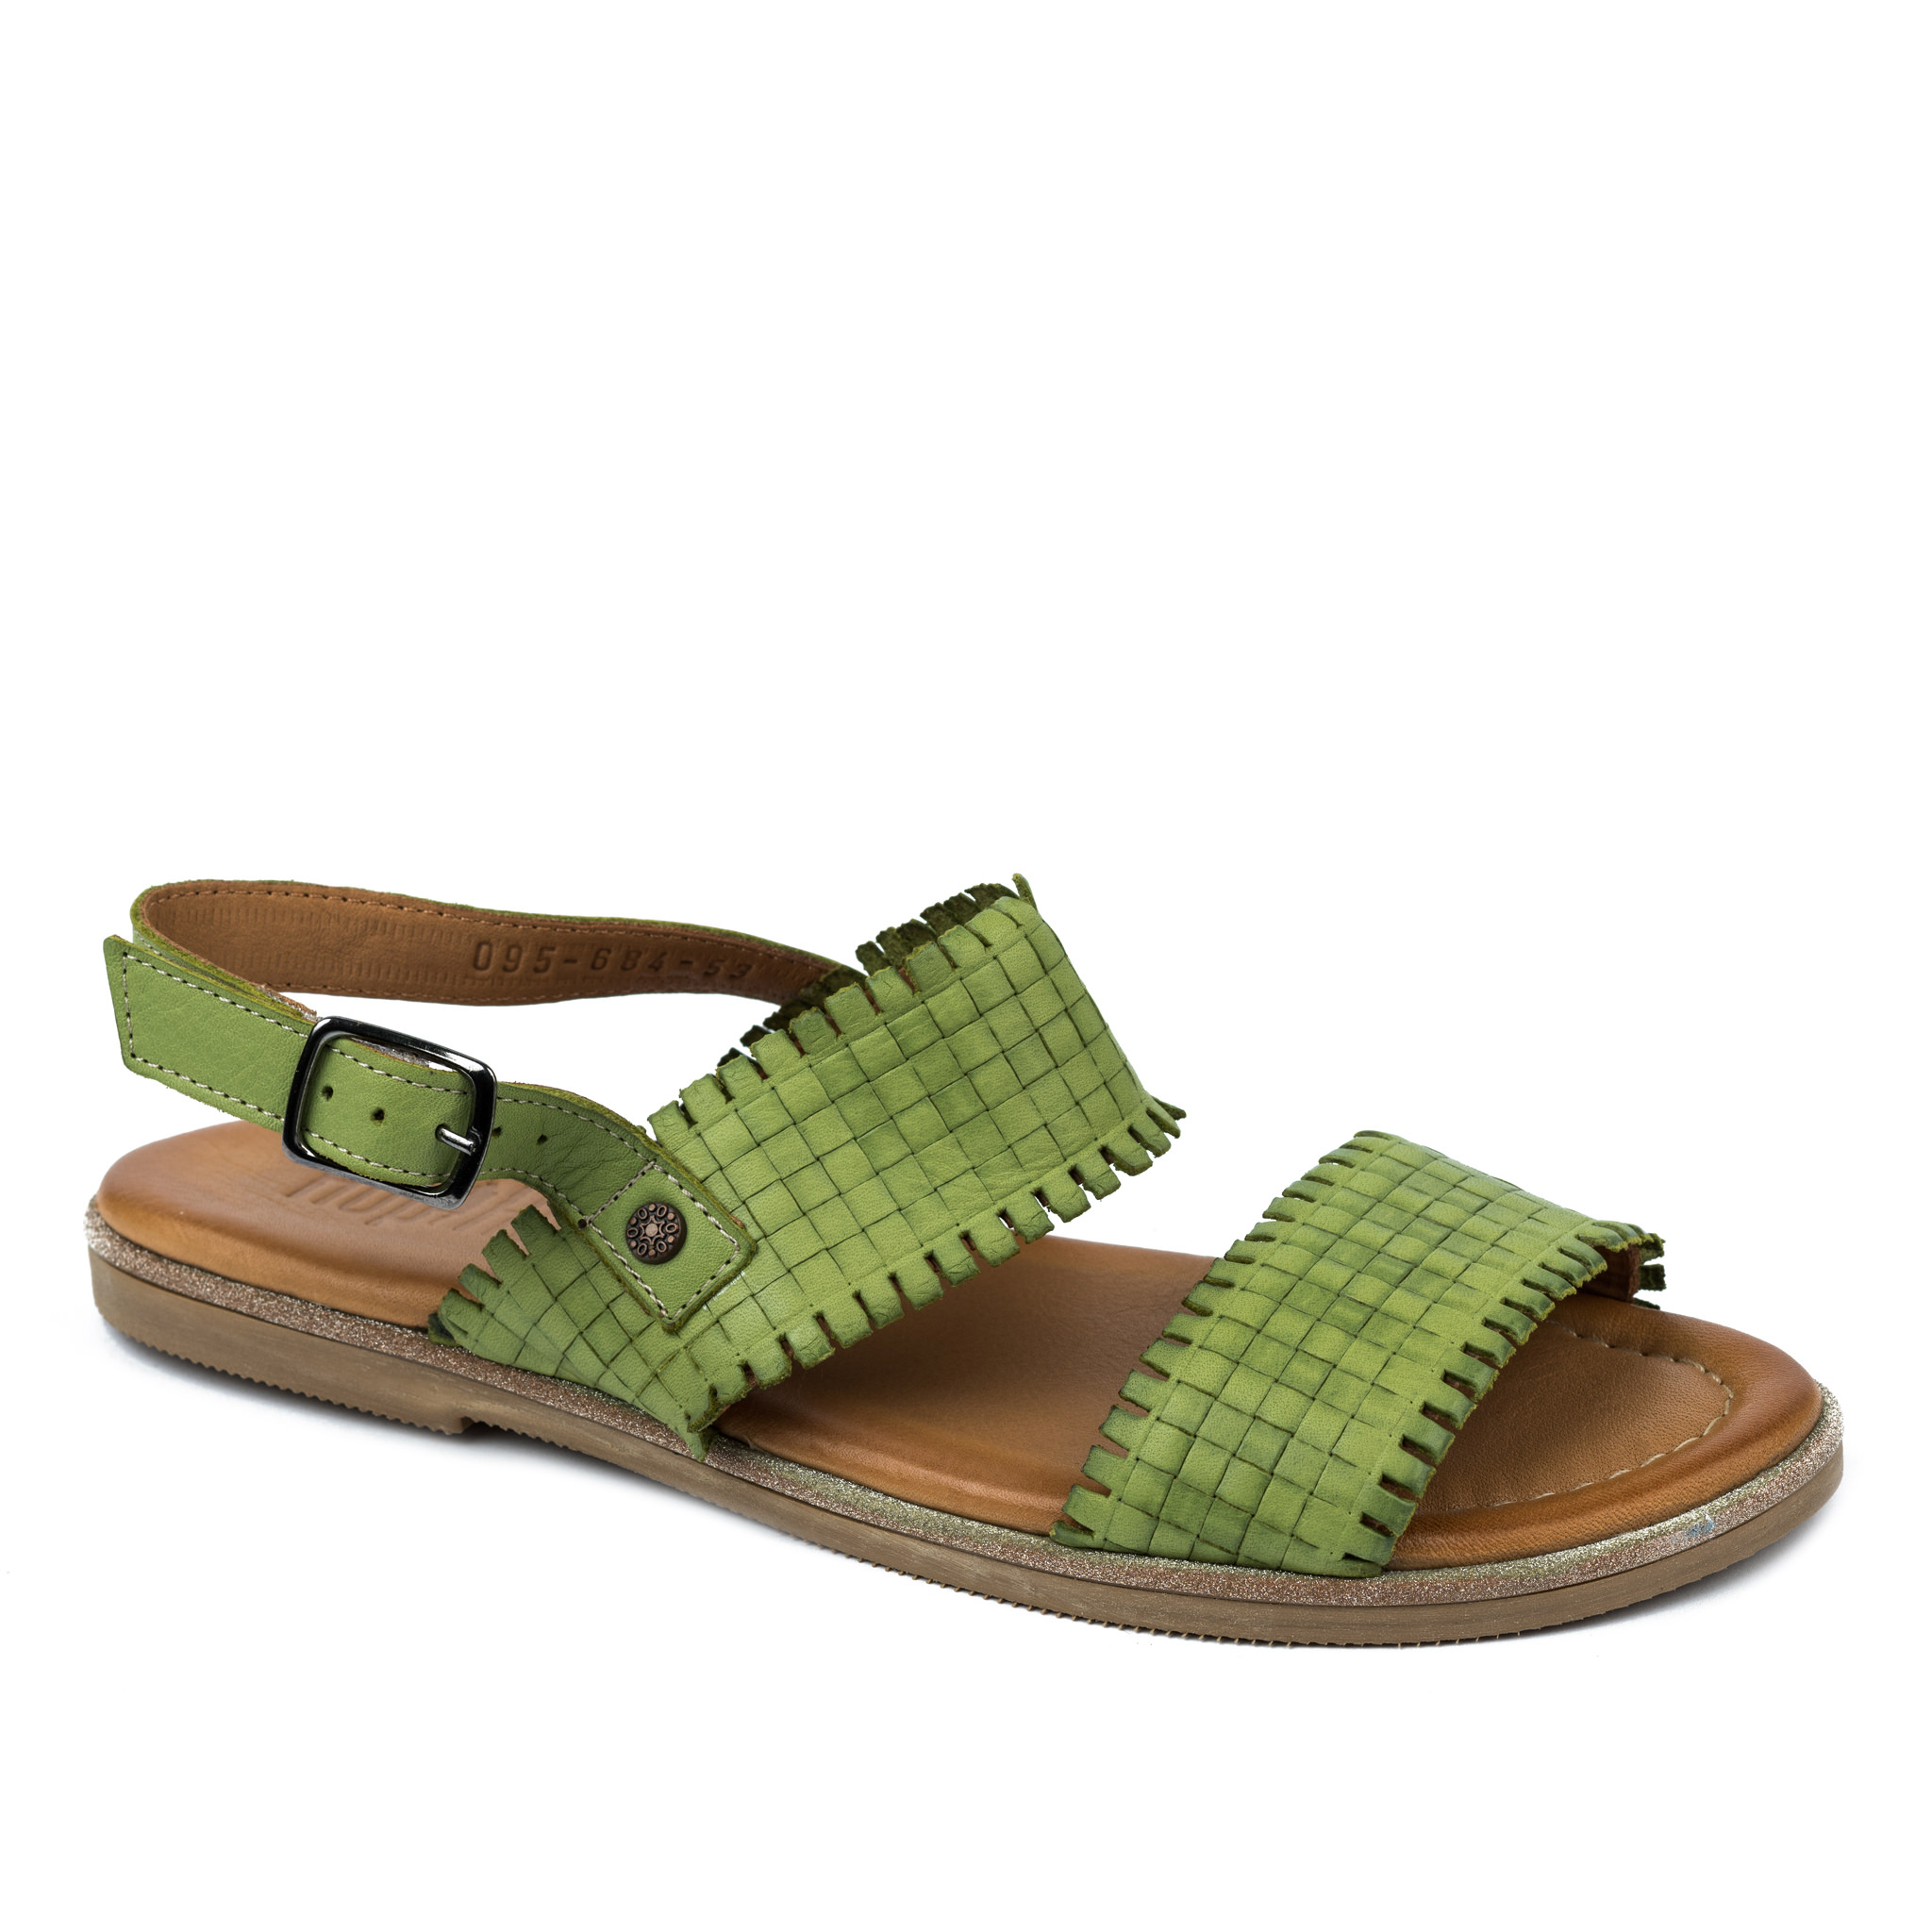 Leather sandals A684 - GREEN